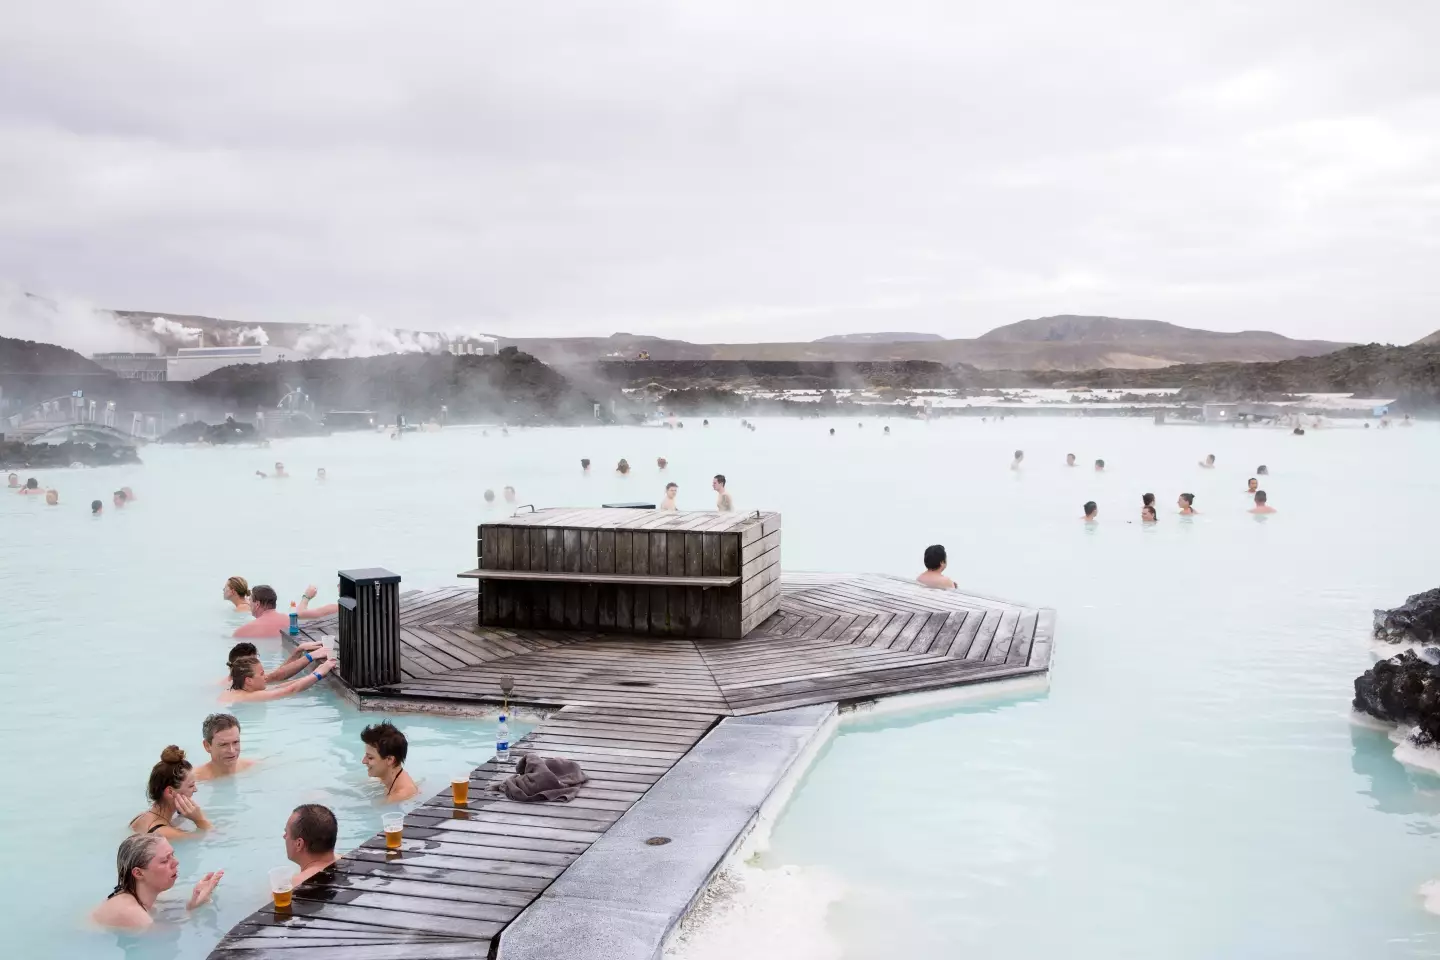 Iceland's top tourist attraction the Blue Lagoon has been closed.